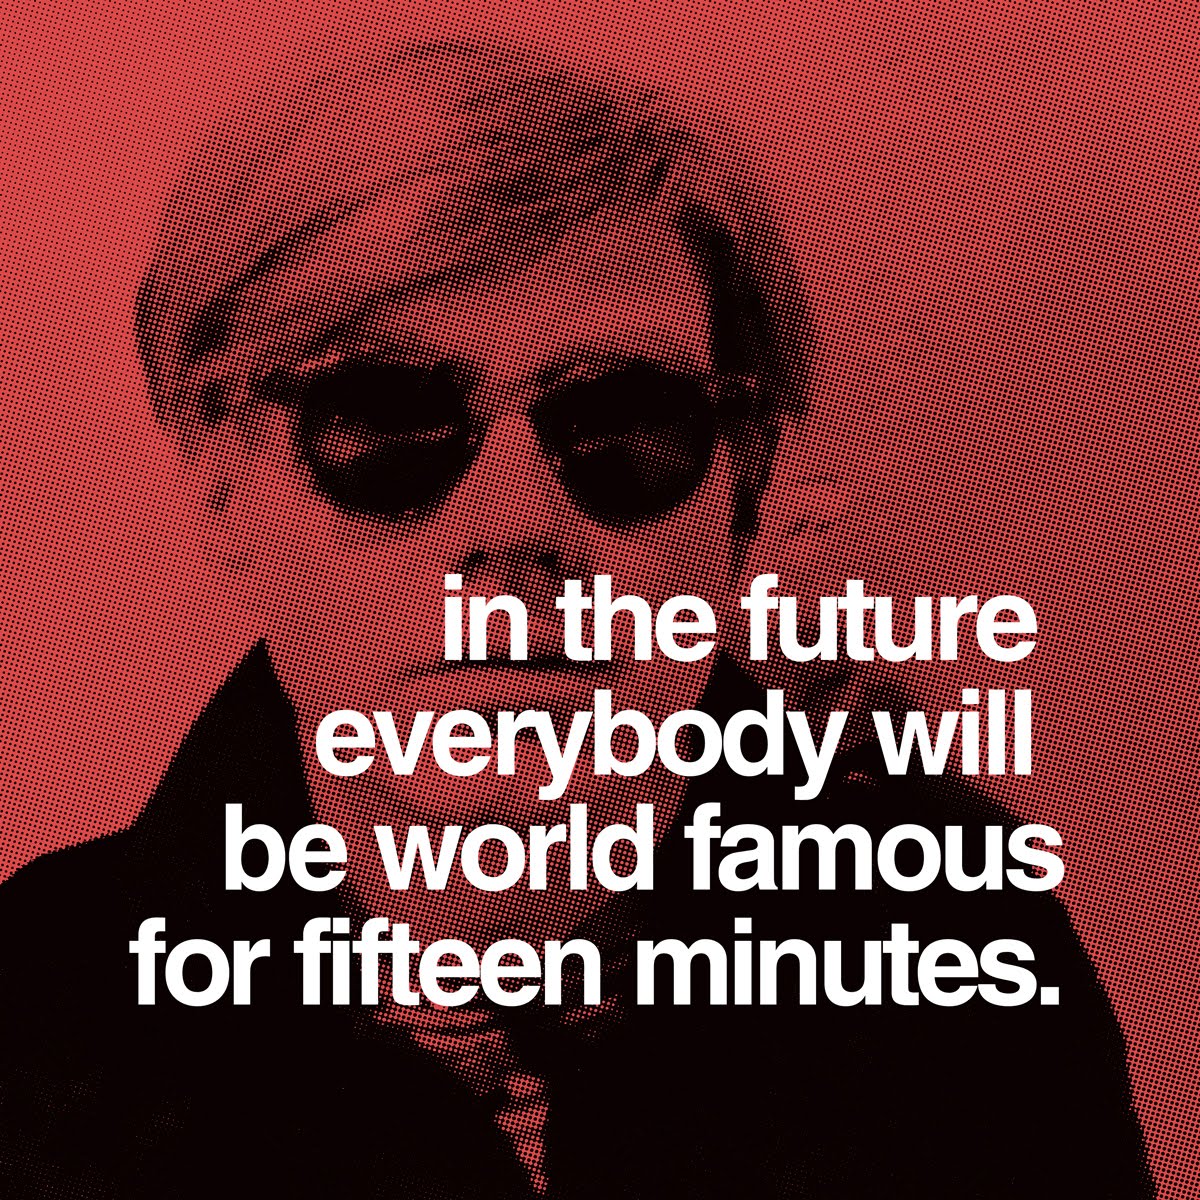 Andy Warhol quote fame